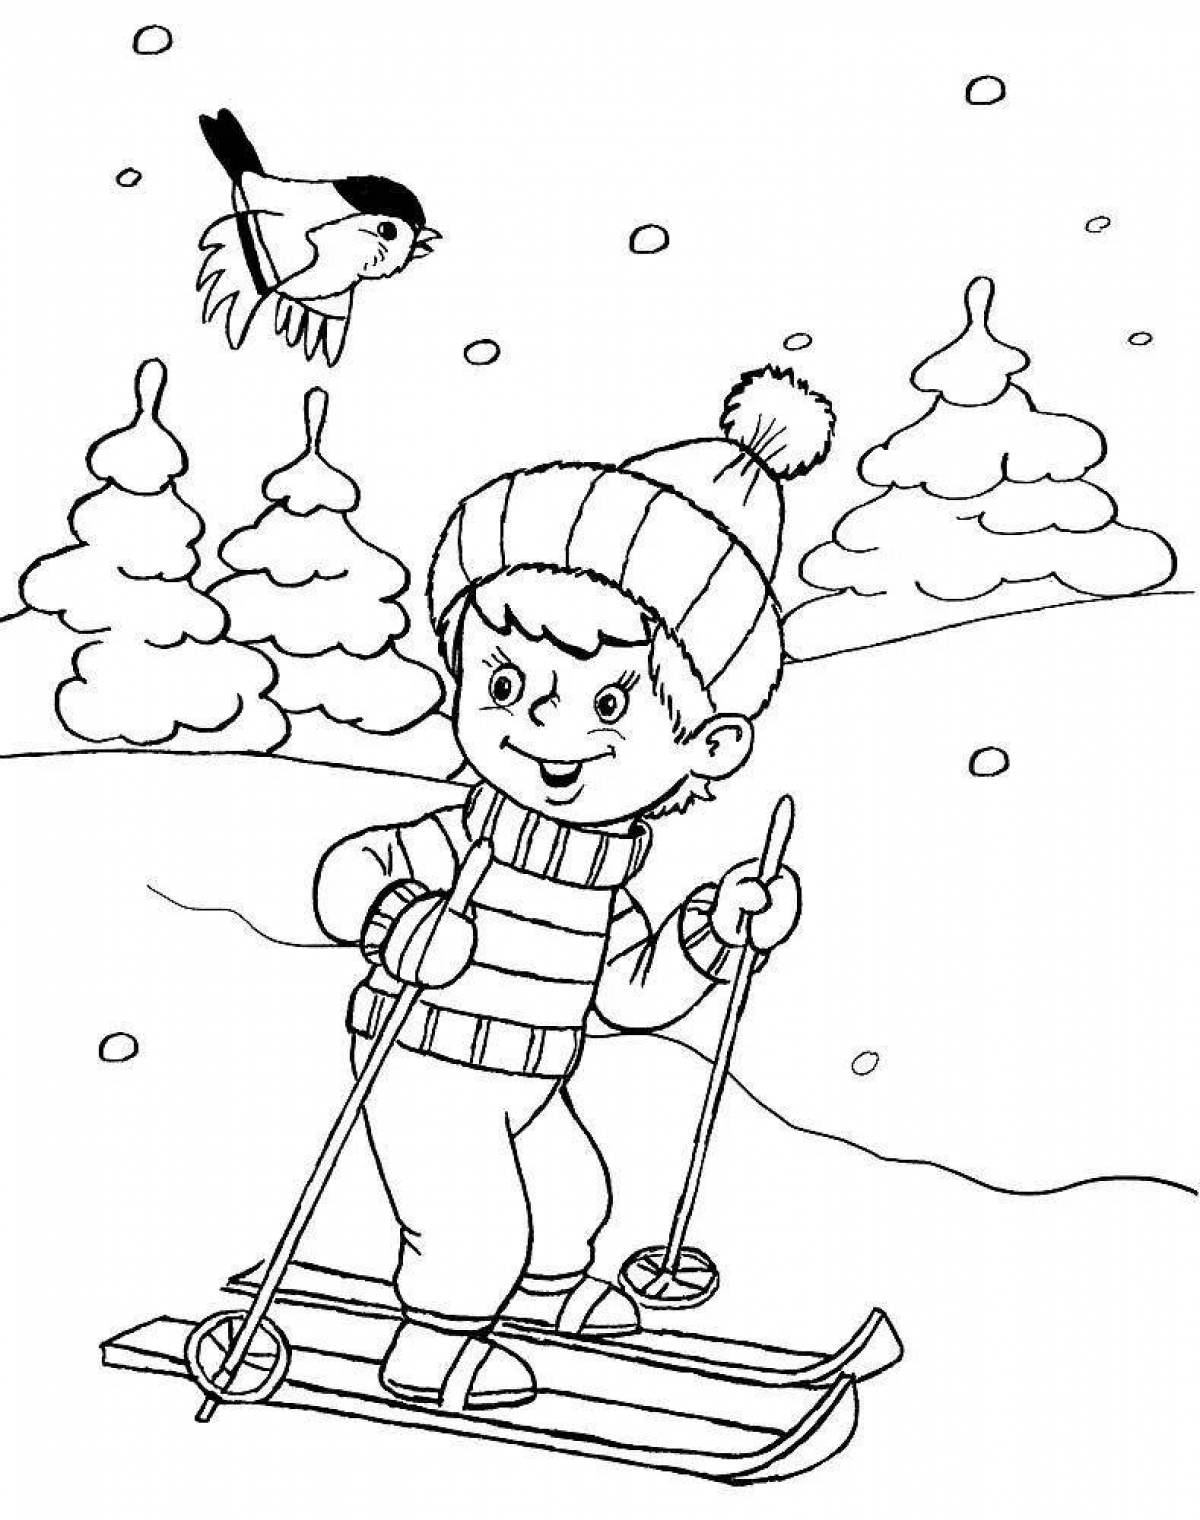 Great coloring book for kids to have fun in winter